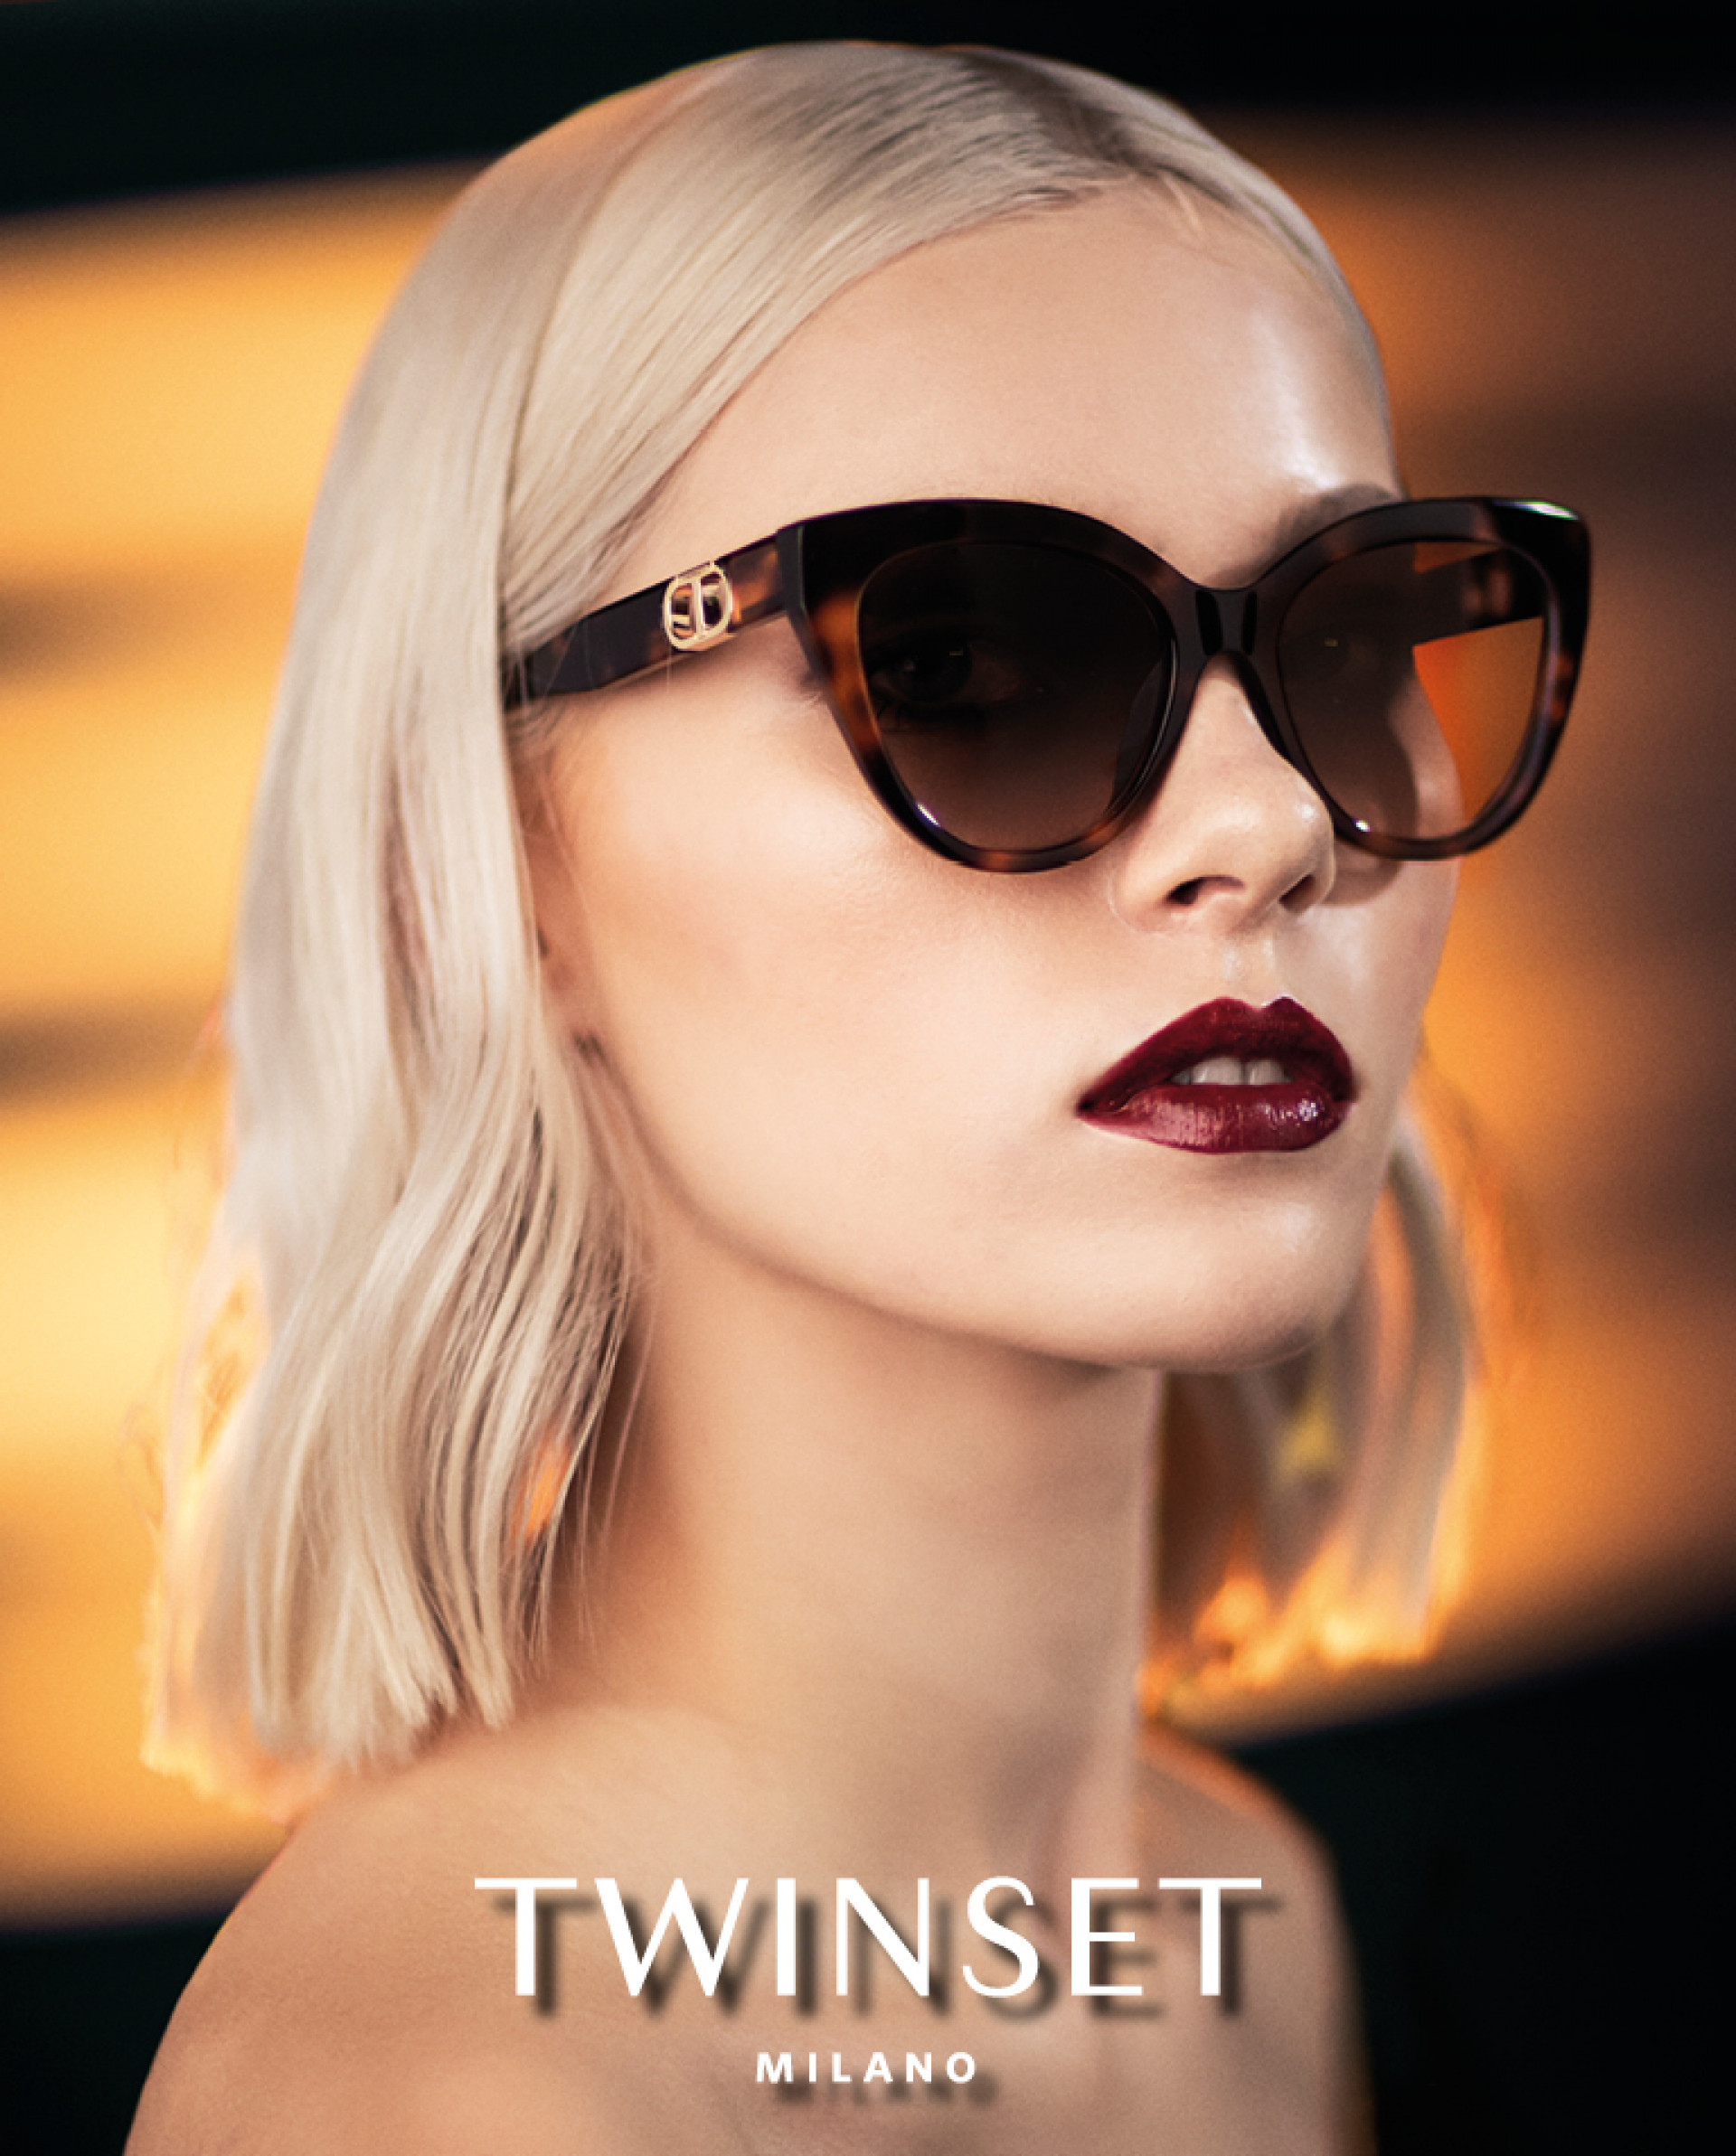 DE RIGO AND TWINSET SIGN A LICENSE AGREEMENT FOR THE BRAND’S EYEWEAR